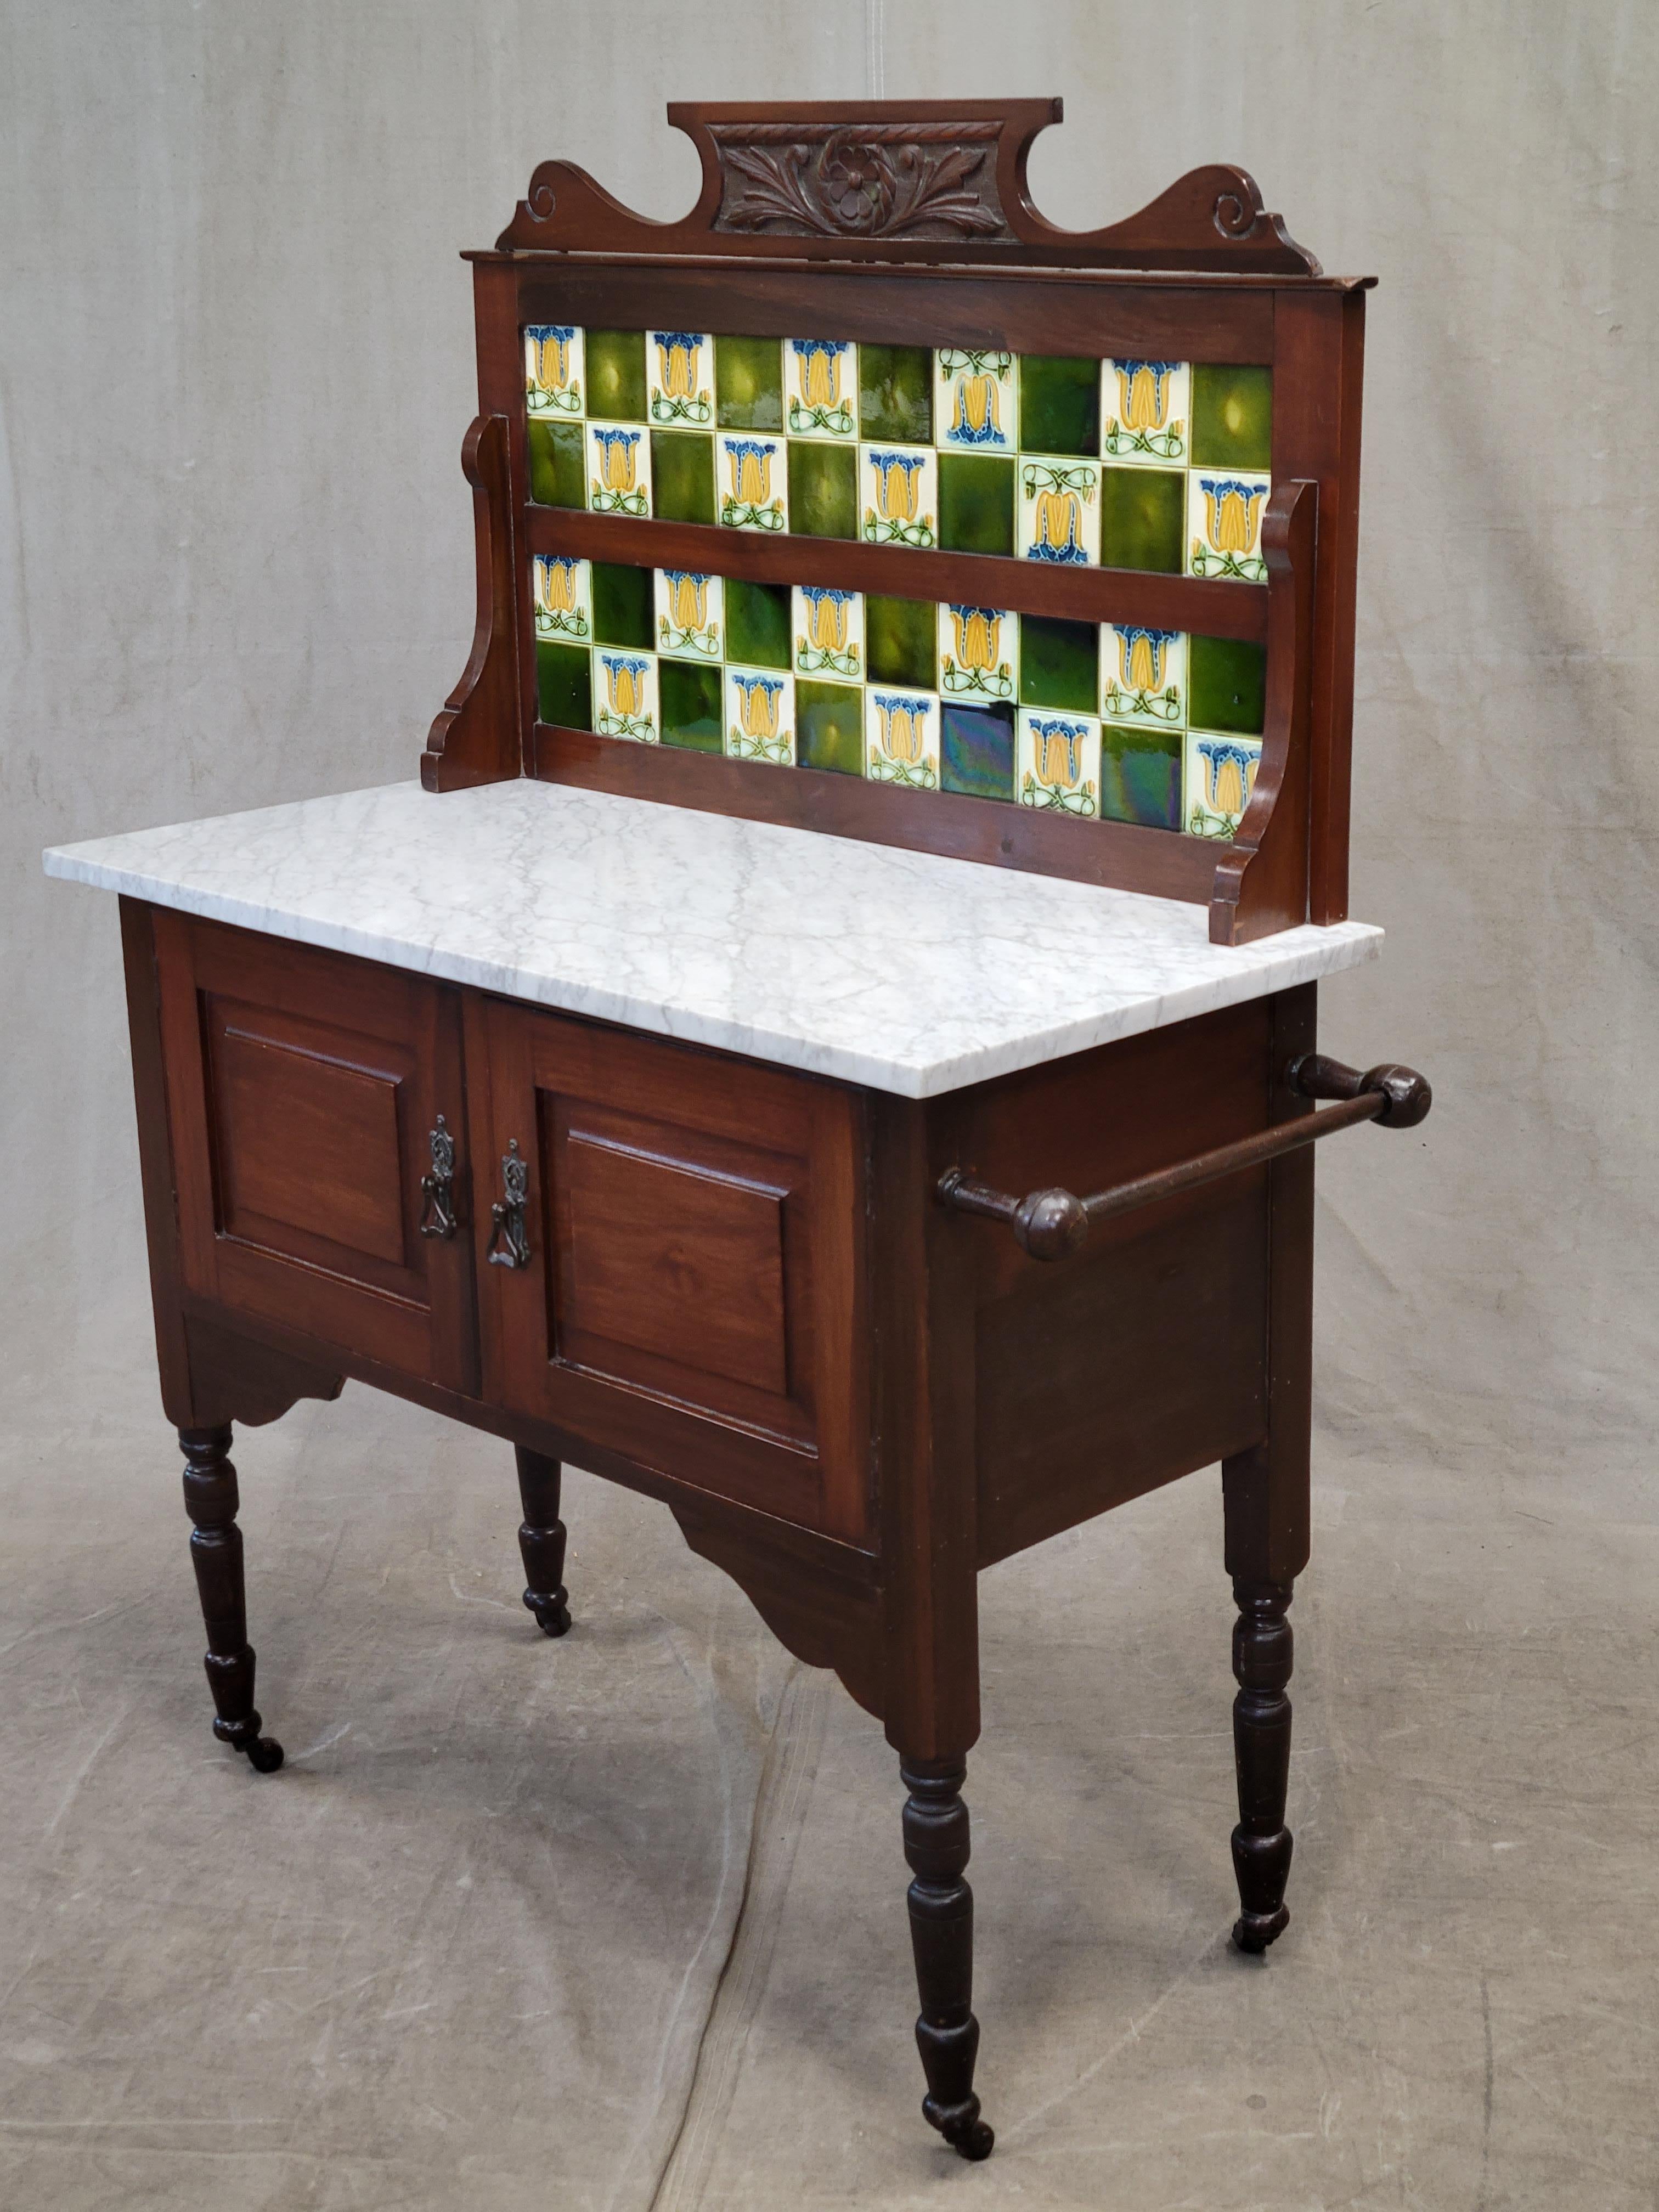 Such a charming antique English mahogany washstand with Carrara marble top and green tulip tile backsplash. In original but very good condition. The towel bar, marble and tile are all original to this piece. The wood bears the original finish and